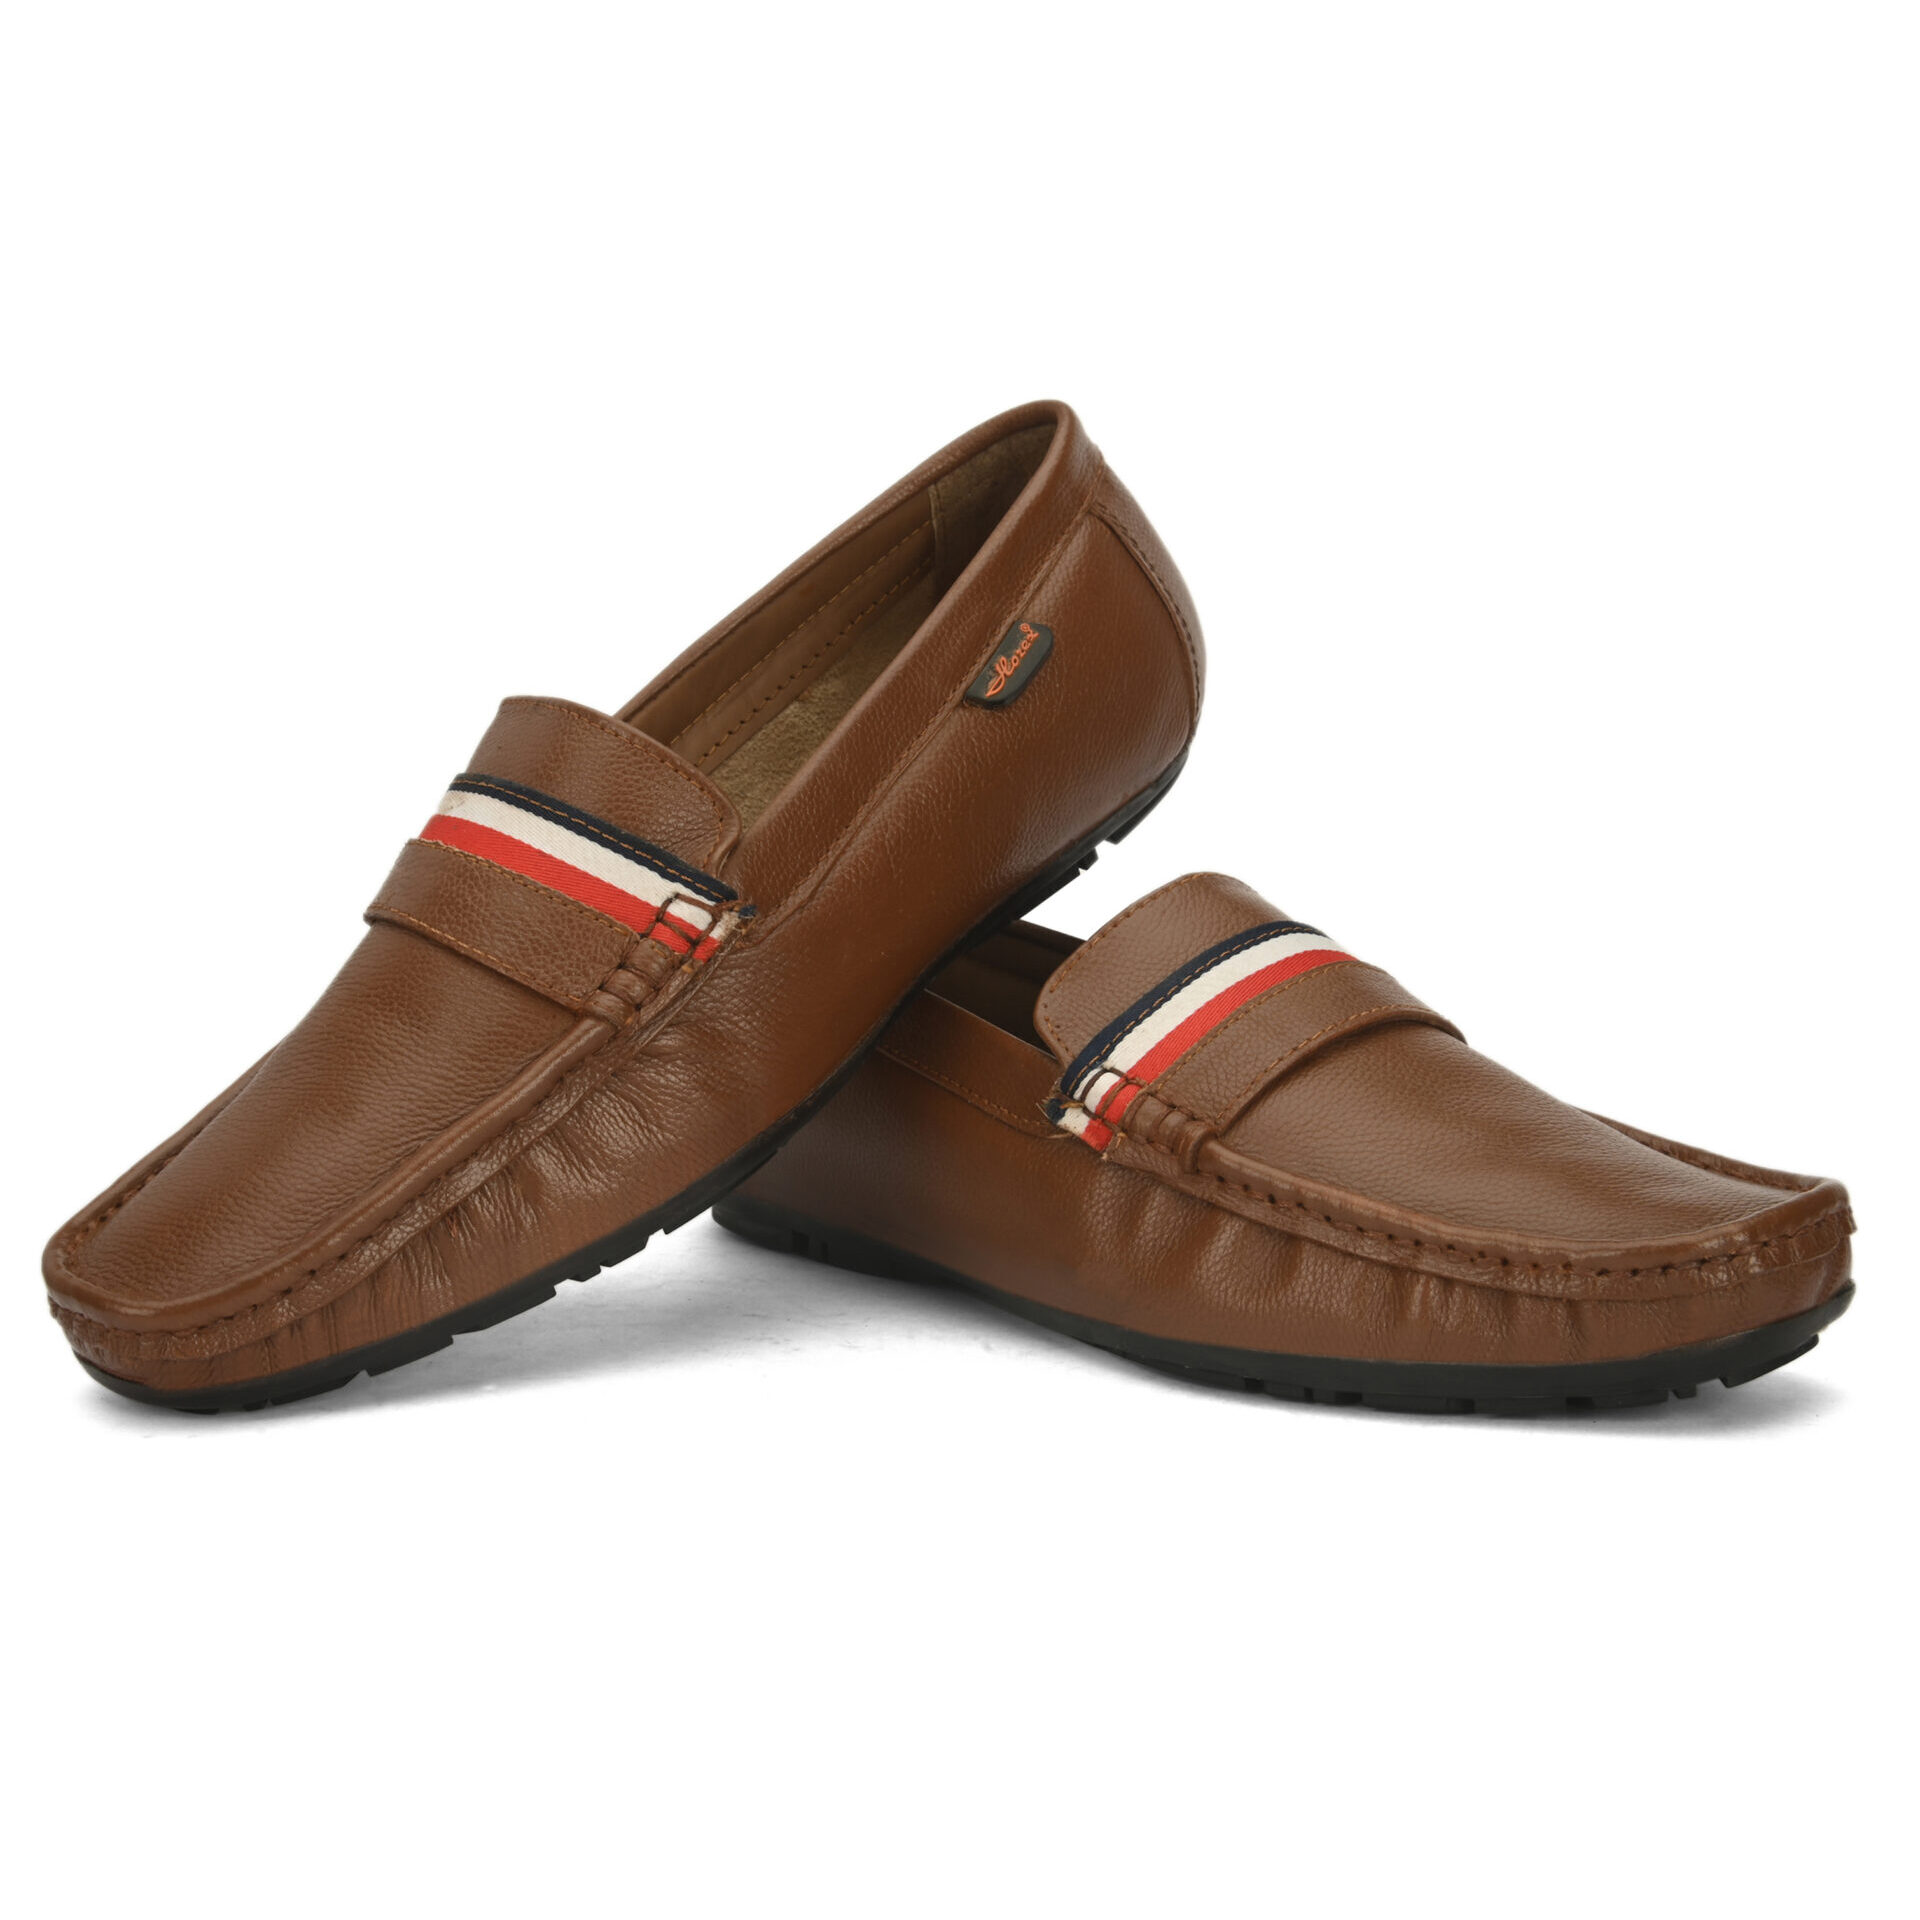 Tan Colour Loafers For Men, Made In 100% Real Leather | Horex®